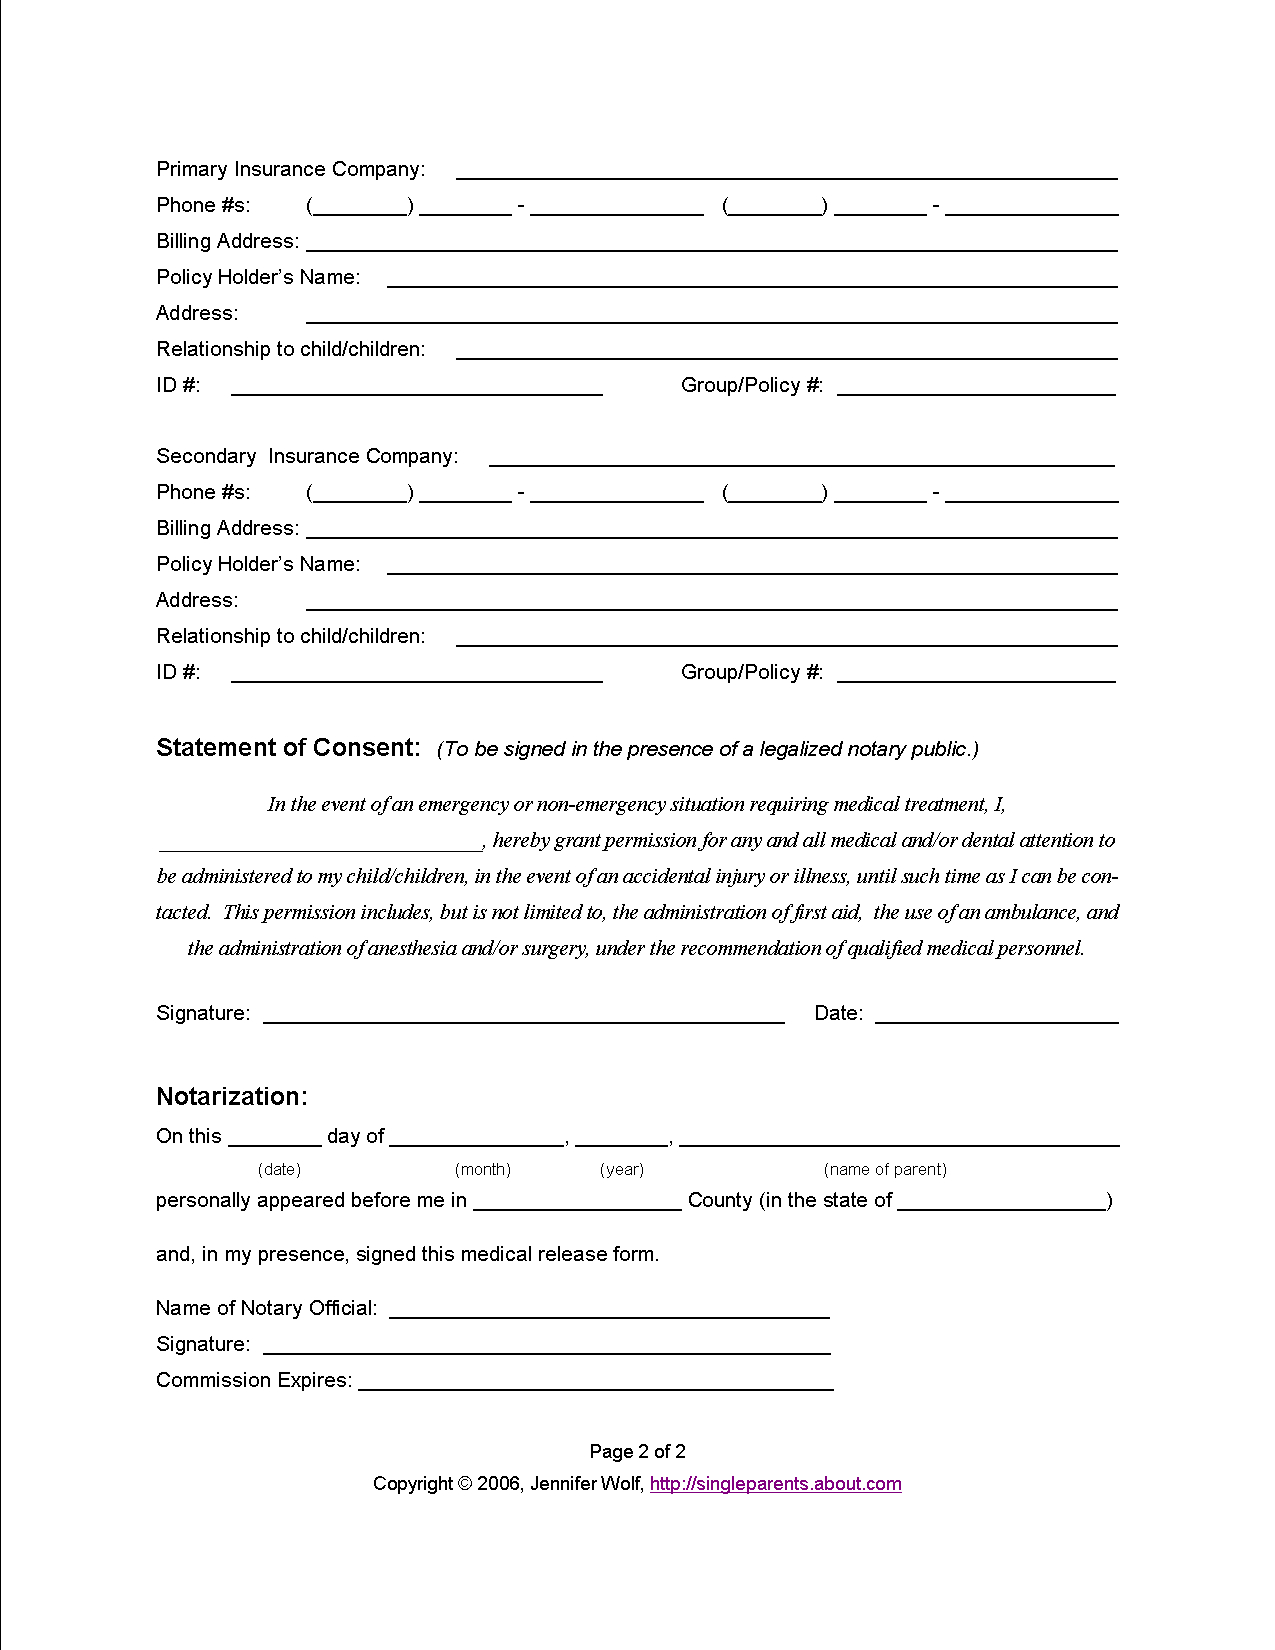 Medical Release Letter Template - Do You Have A Medical Release form for Your Kids